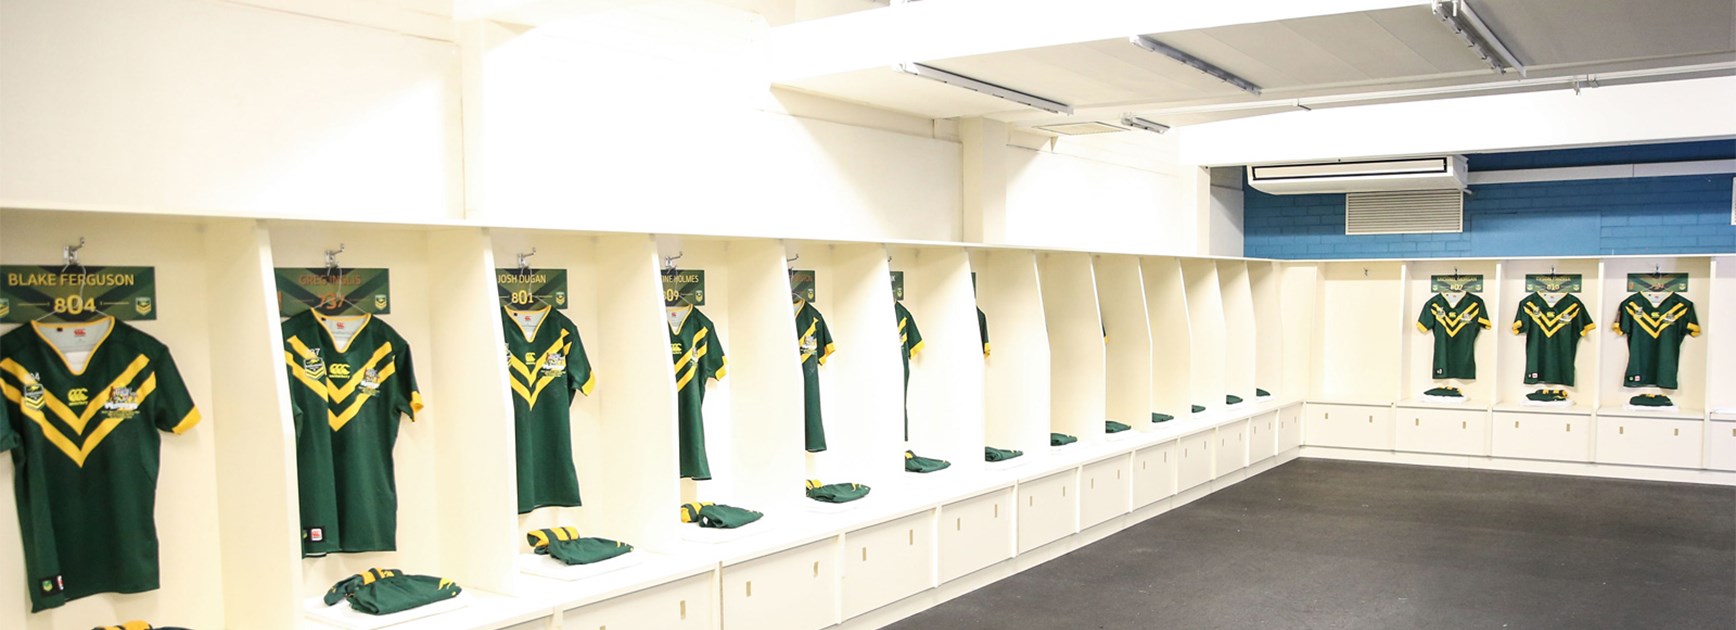 The Kangaroos dressing room before Saturday night's clash with New Zealand in Perth.